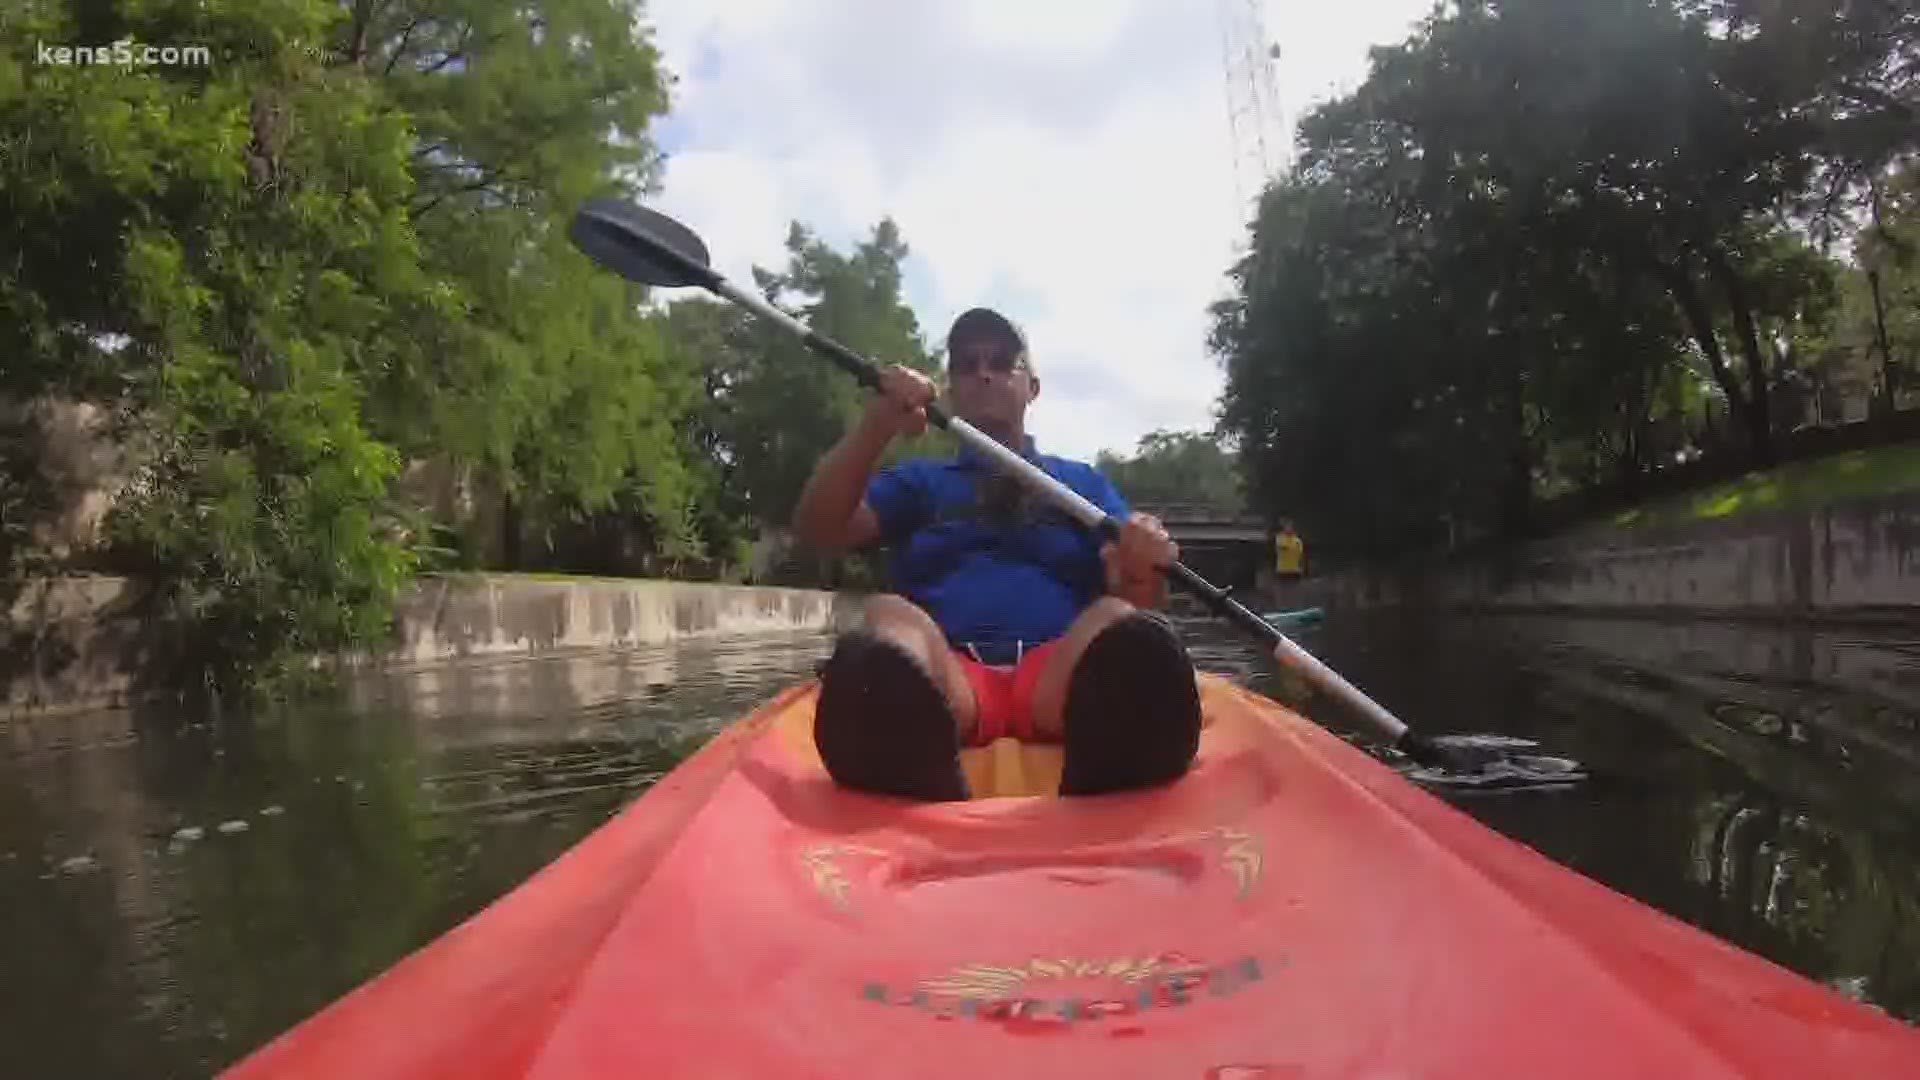 You're used to walking next to the San Antonio River, but what about paddle boarding or kayaking in it?